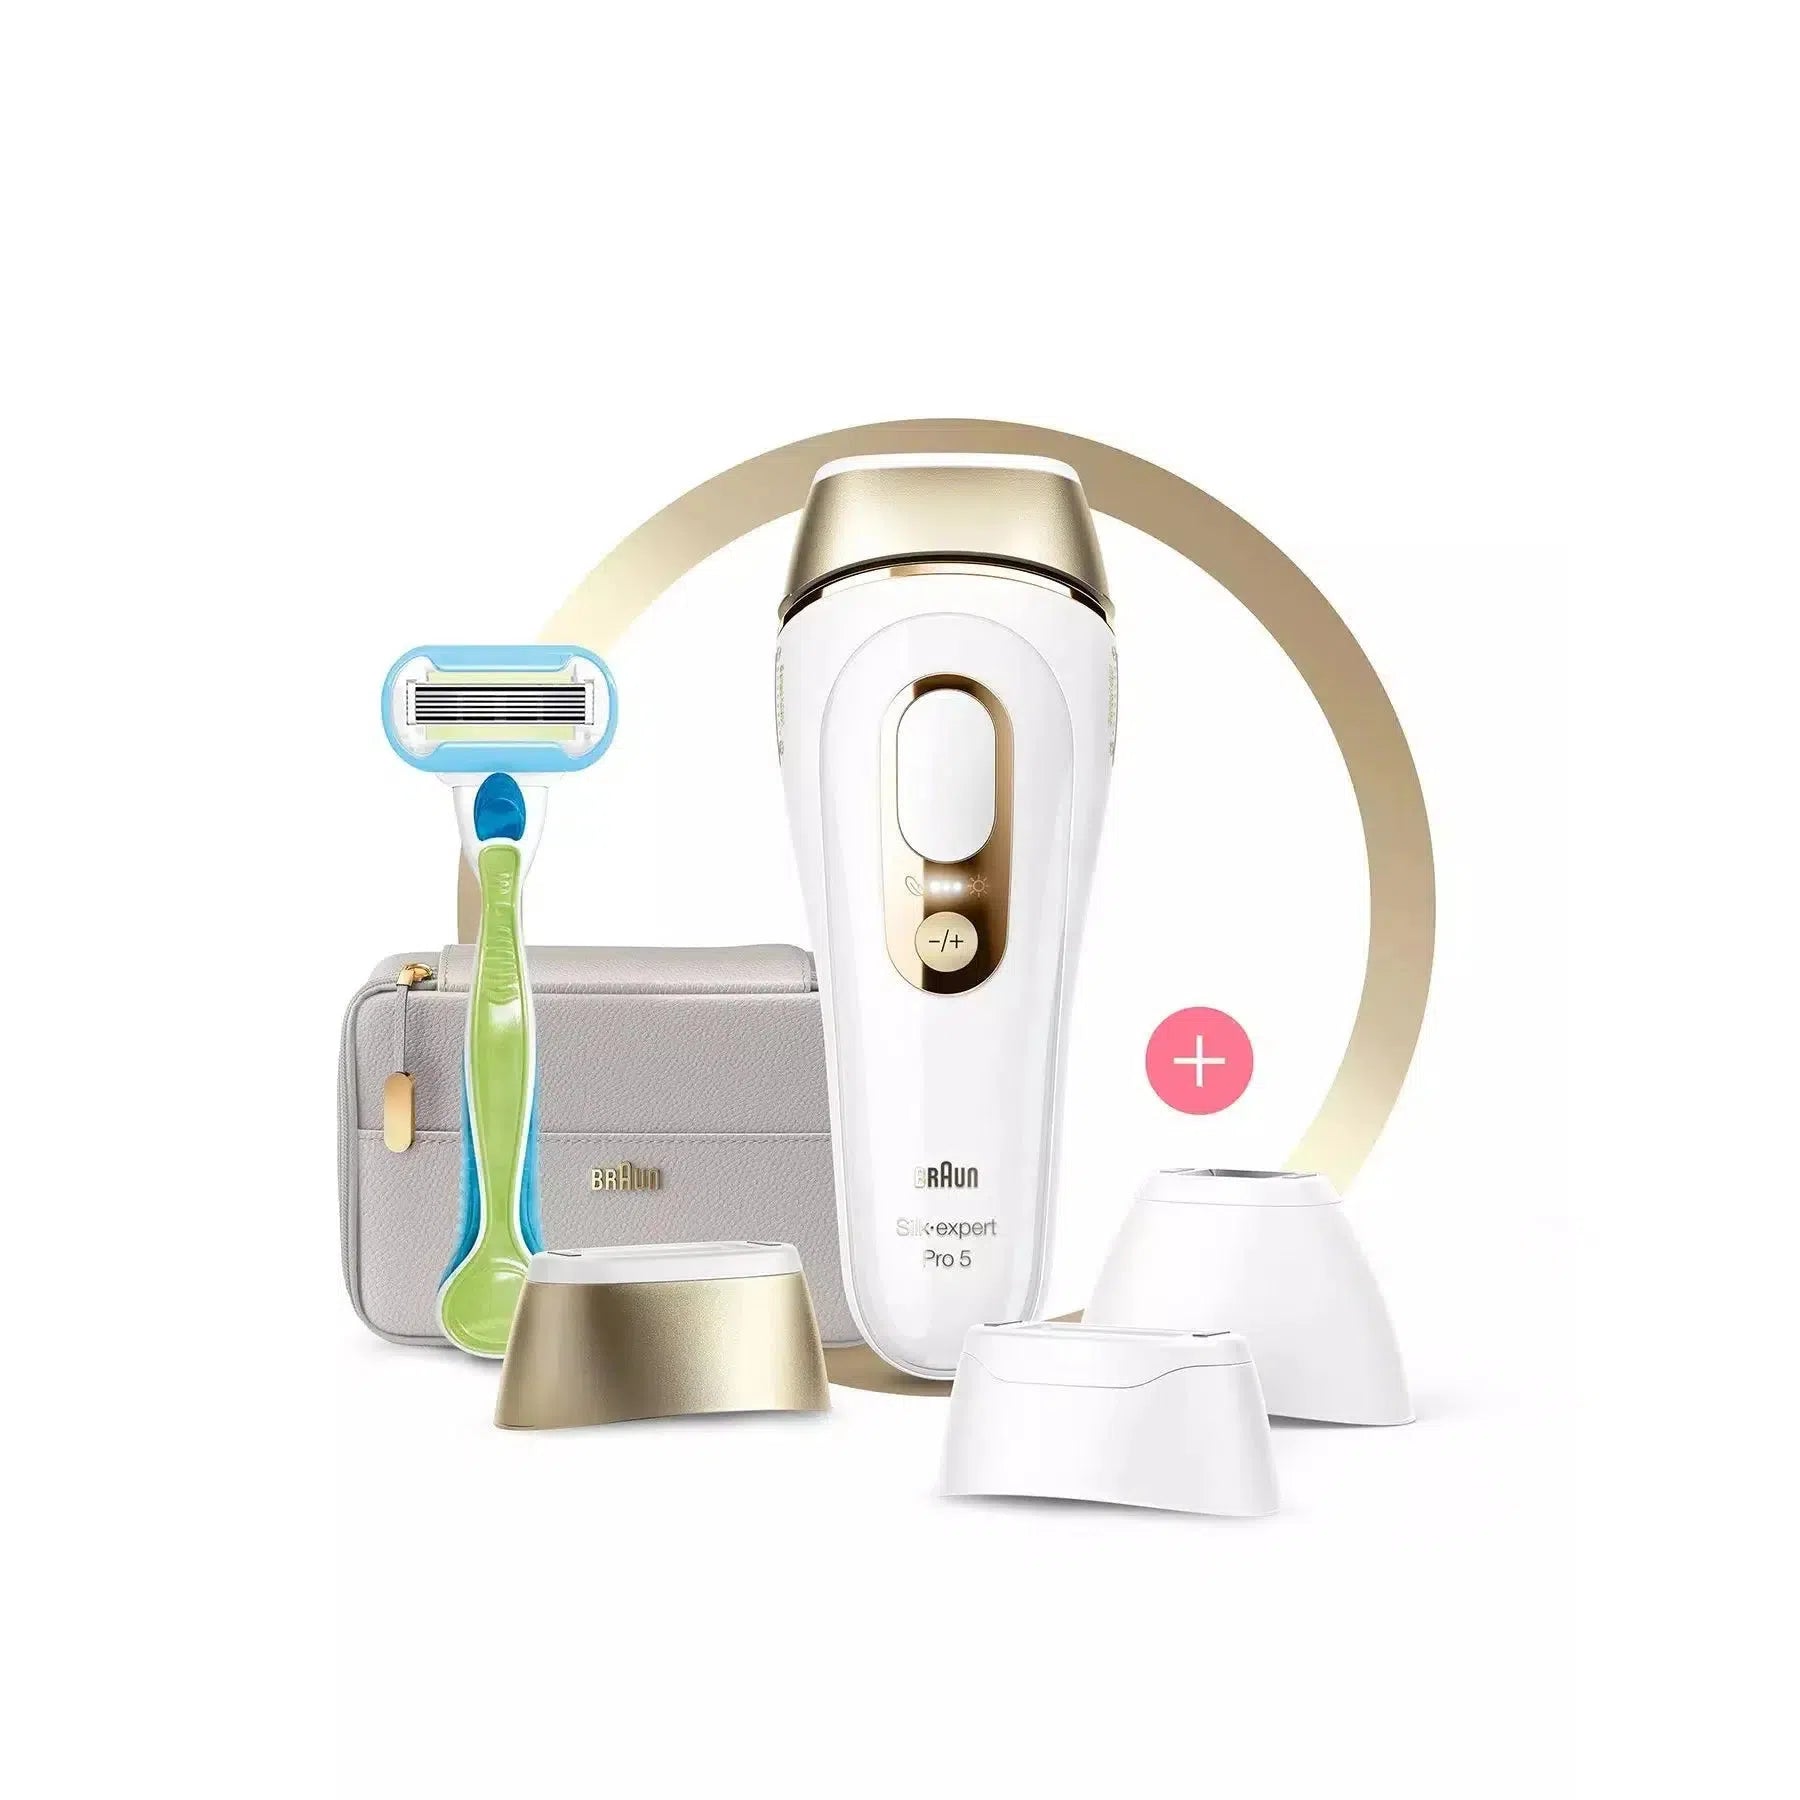 Braun Silk-expert Pro 5 PL5257 IPL Hair Removal System with precision